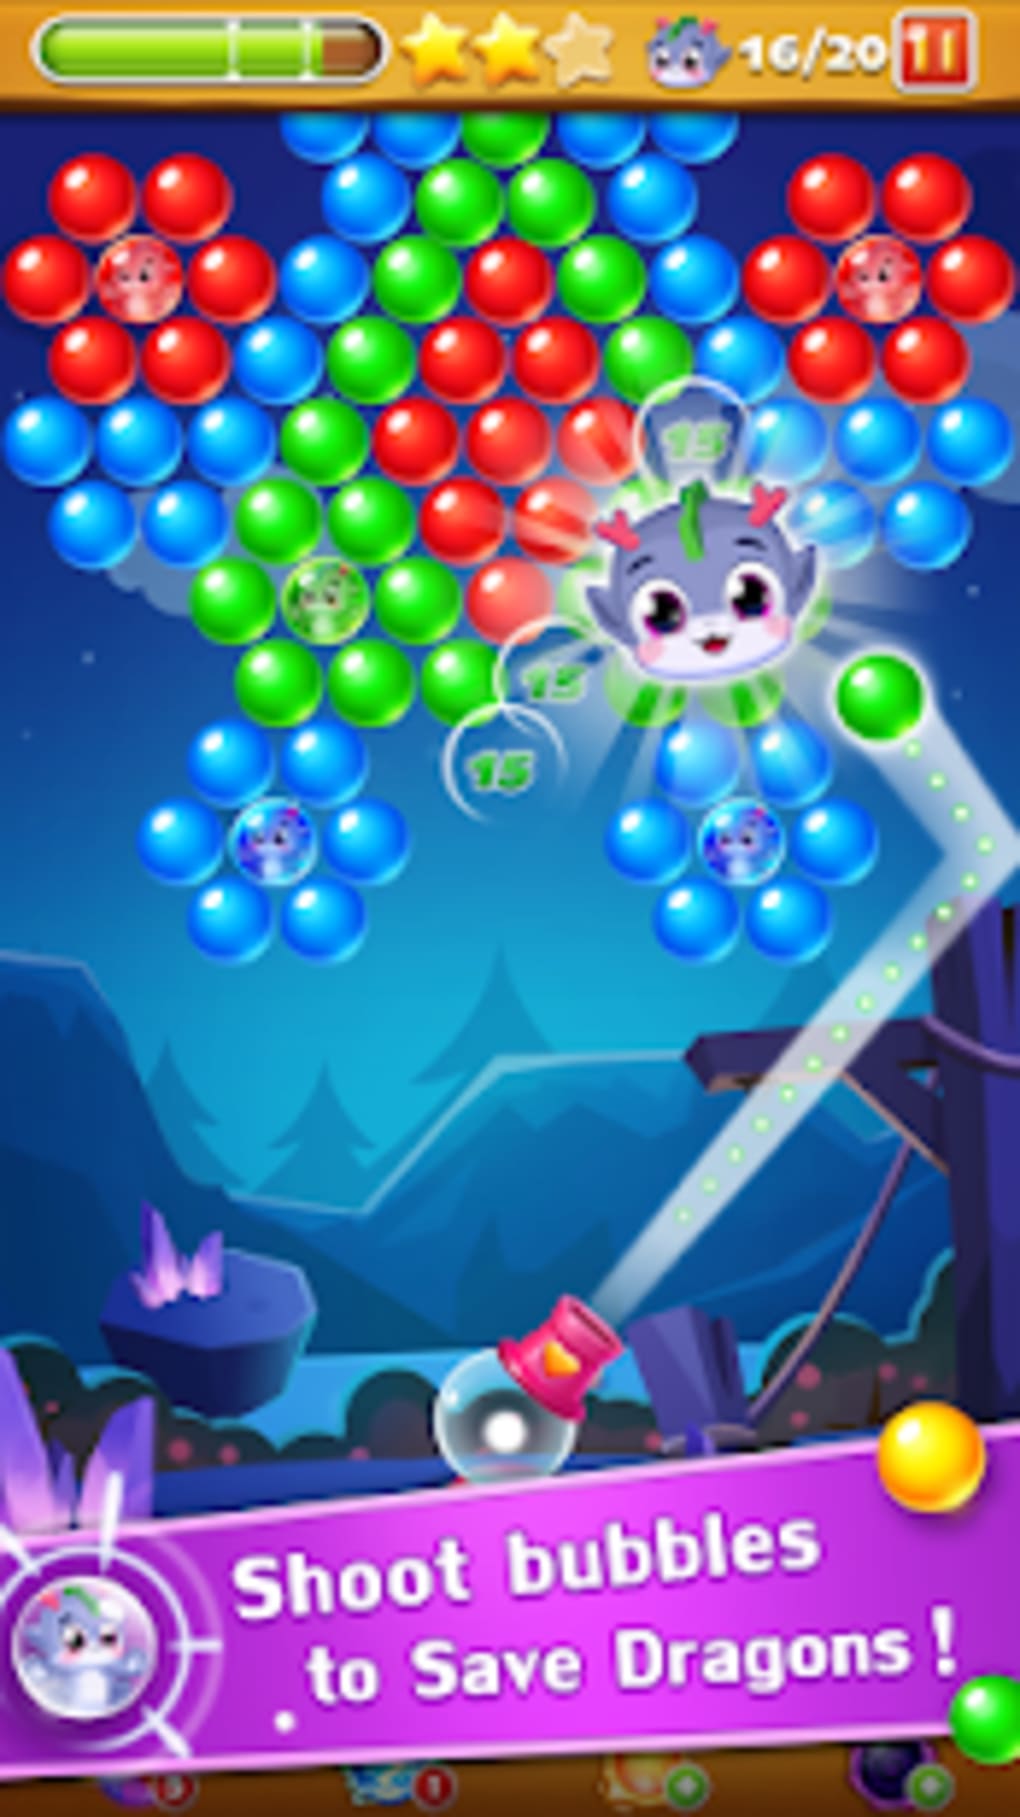 Bubble Shooter Legend Fun Game On Cell Phone 